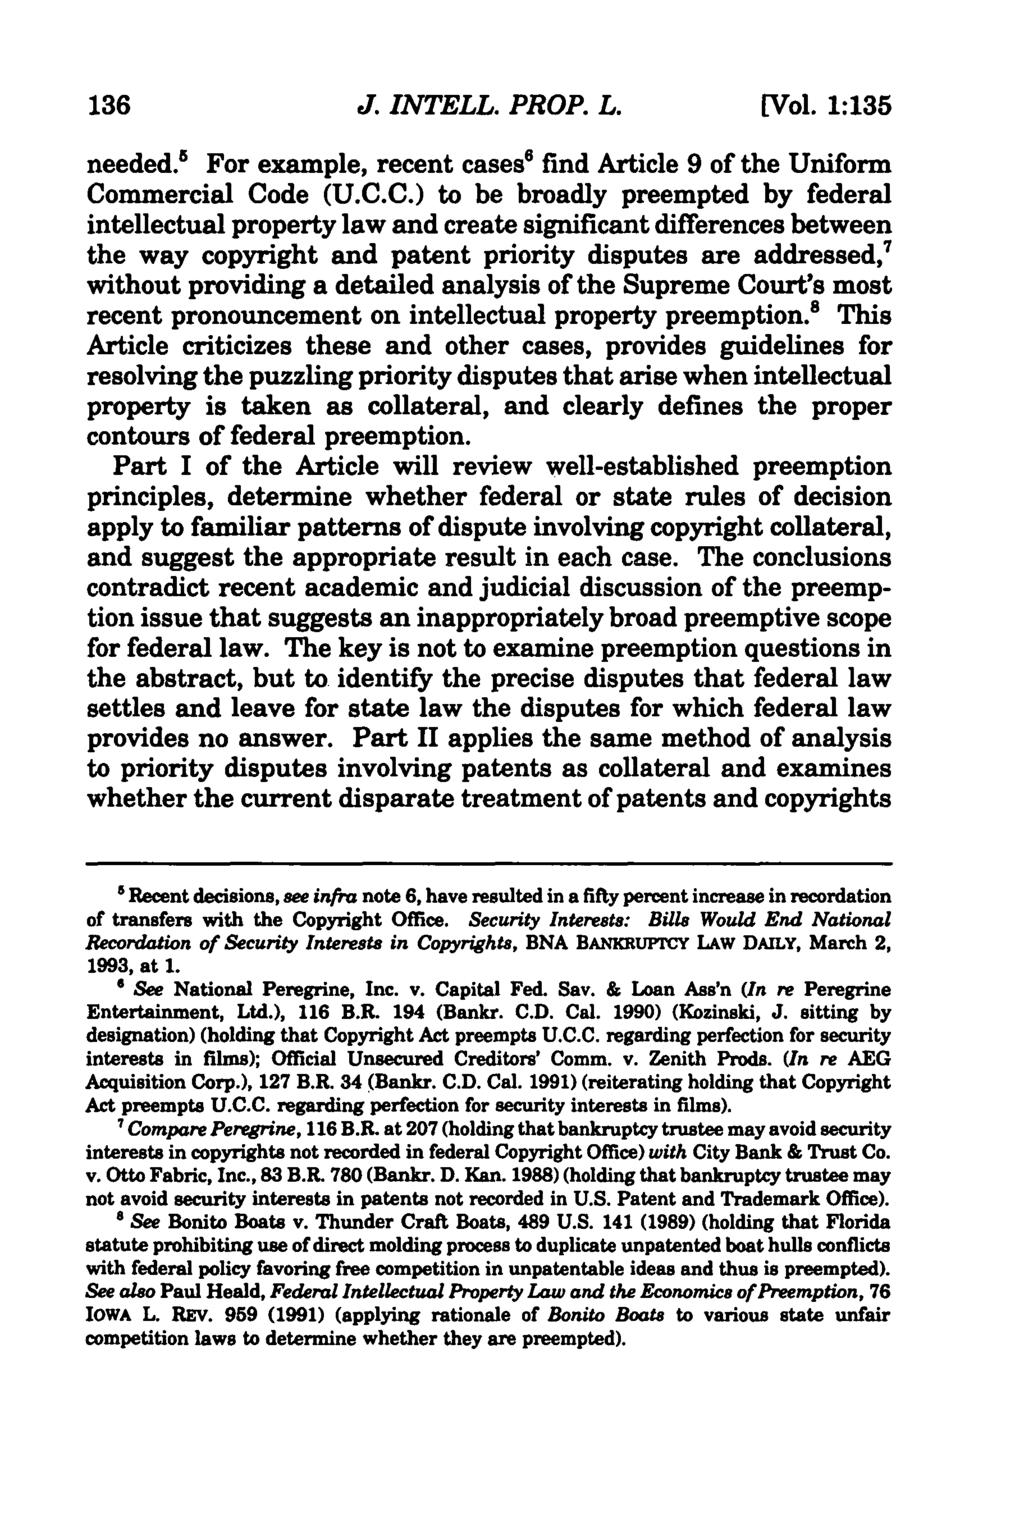 136 Journal of Intellectual Property Law, Vol. 1, Iss. 1 [1993], Art. 8 J. INTELL. PROP. L. (Vol. 1:135 needed. 5 For example, recent cases' find Article 9 of the Uniform Co